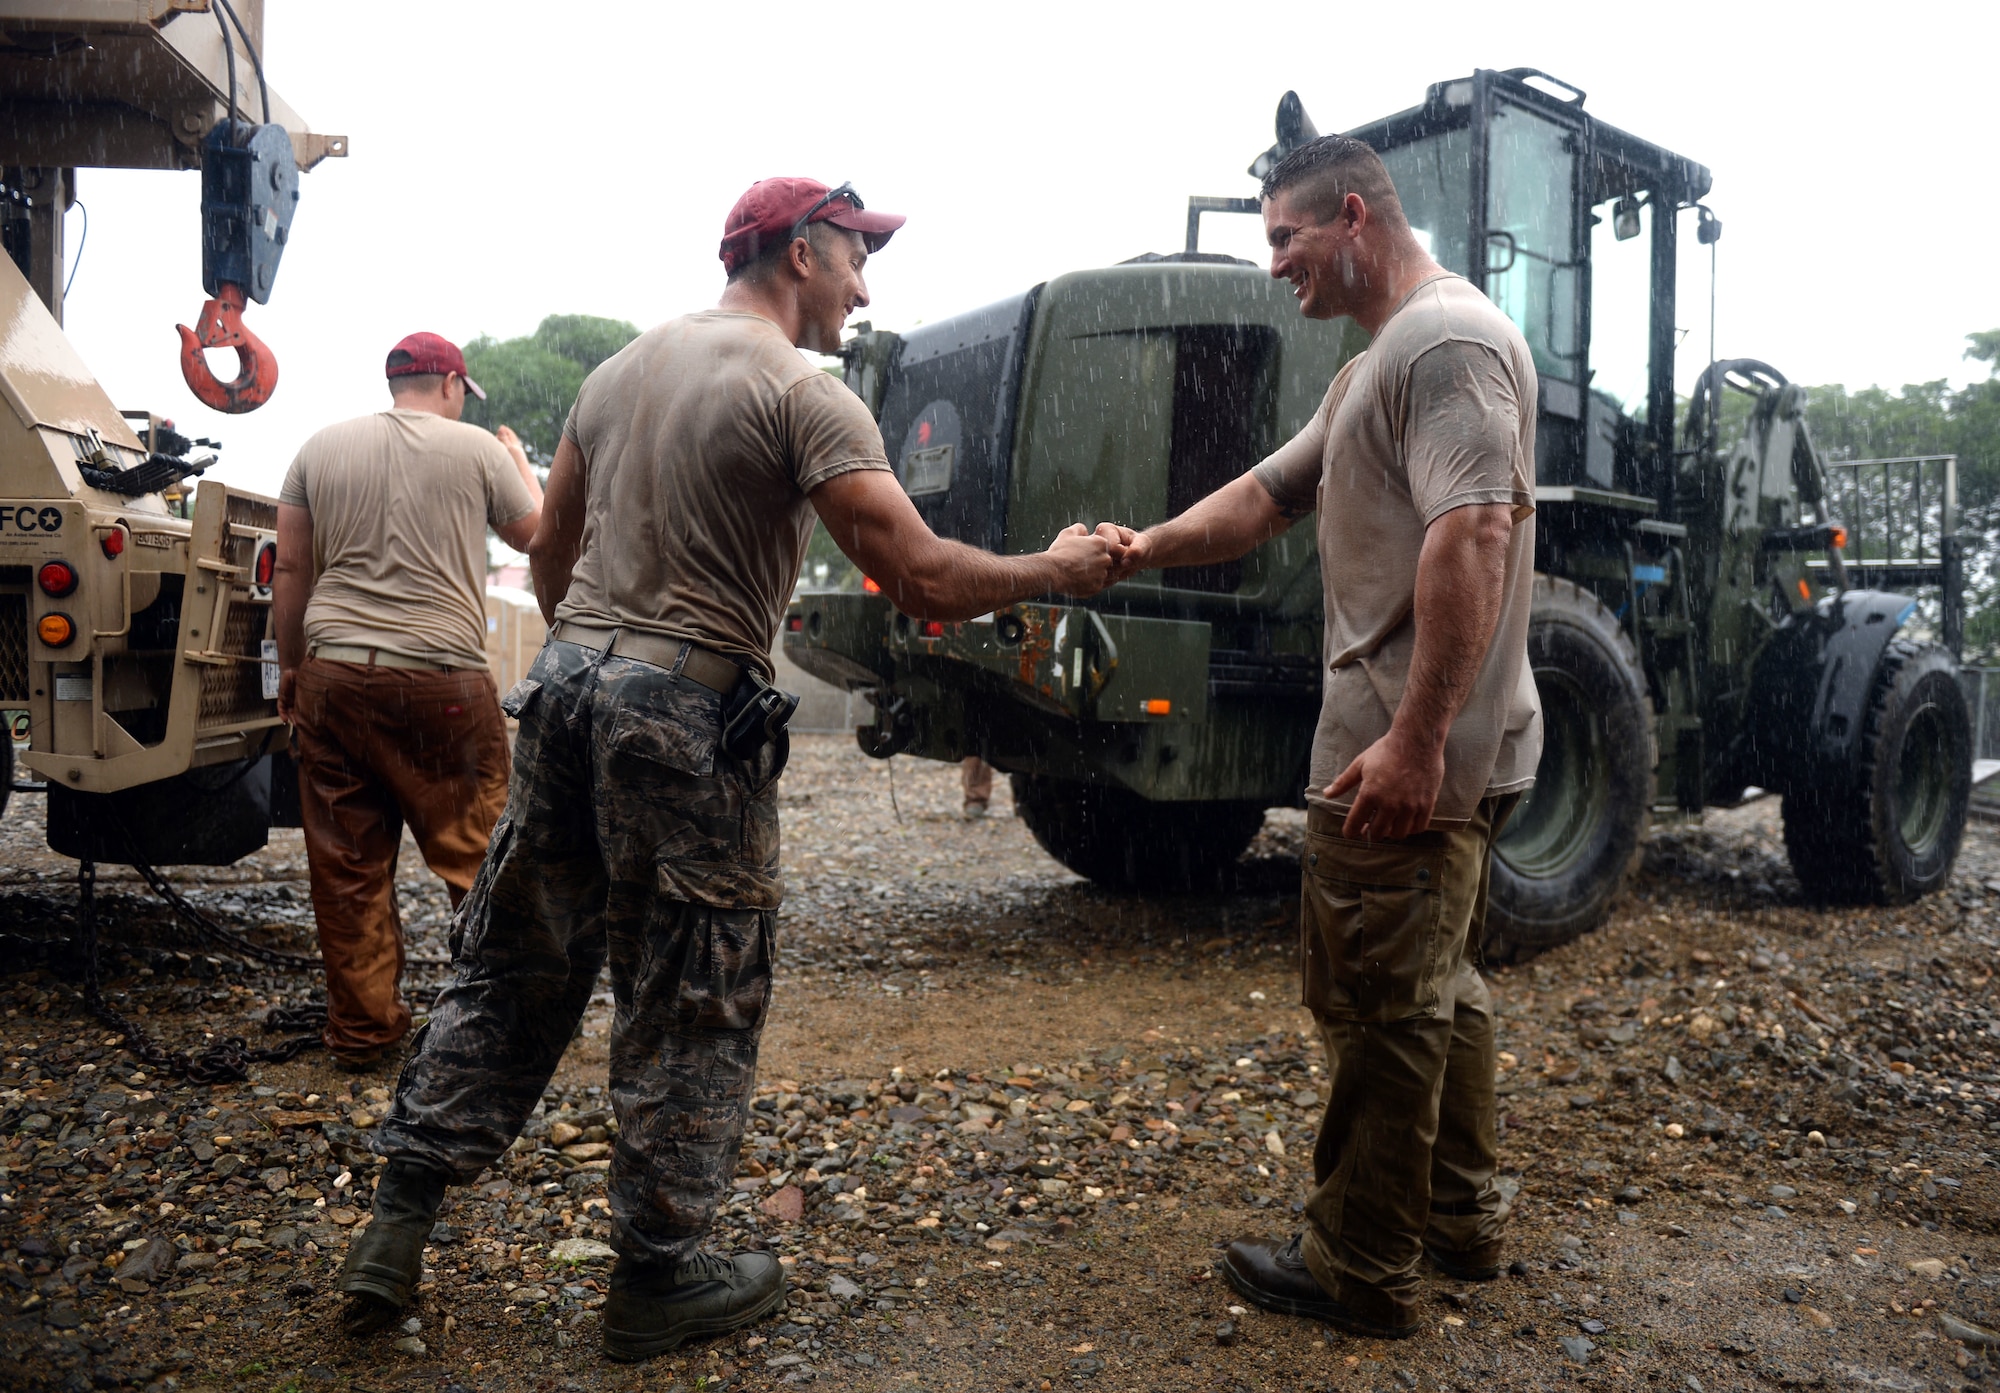 U.S. Air Force Senior Airman Charles Ballou (left) fist bumps U.S. Air Force Staff Sgt. Zacharia Blower, both 823rd Expeditionary RED HORSE Squadron pavements and construction equipment operators, at the well site located in the village of Honduras Aguan near Trujillo, Honduras, June 25, 2015. The well is one of multiple projects going on in and around Trujillo as part of NEW HORIZONS Honduras 2015 training exercise. NEW HORIZONS was launched in the 1980s and is an annual joint humanitarian assistance exercise that U.S. Southern Command conducts with a partner nation in Central America, South America or the Caribbean. The exercise improves joint training readiness of U.S. and partner nation civil engineers, medical professionals and support personnel through humanitarian assistance activities. (U.S. Air Force photo by Capt. David J. Murphy/Released)